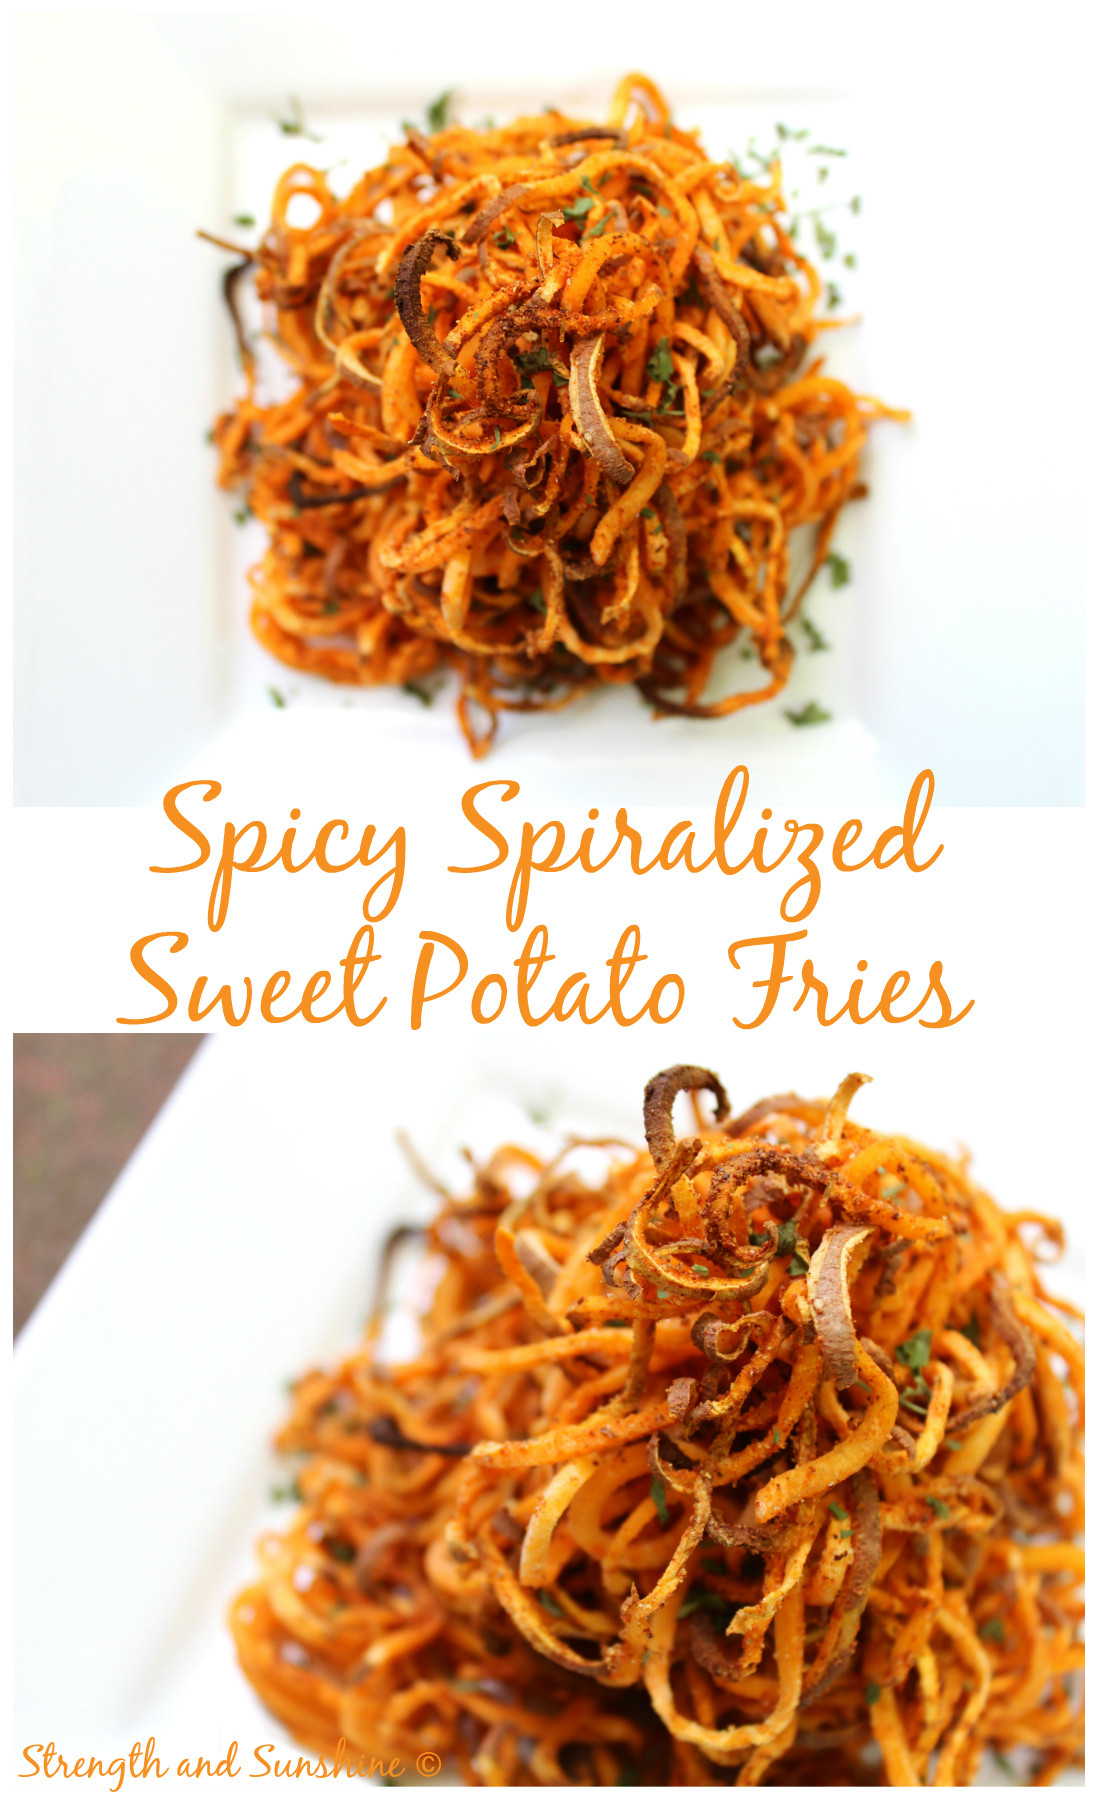 Spiralized Sweet Potato Fries
 Top 10 Posts From 2015